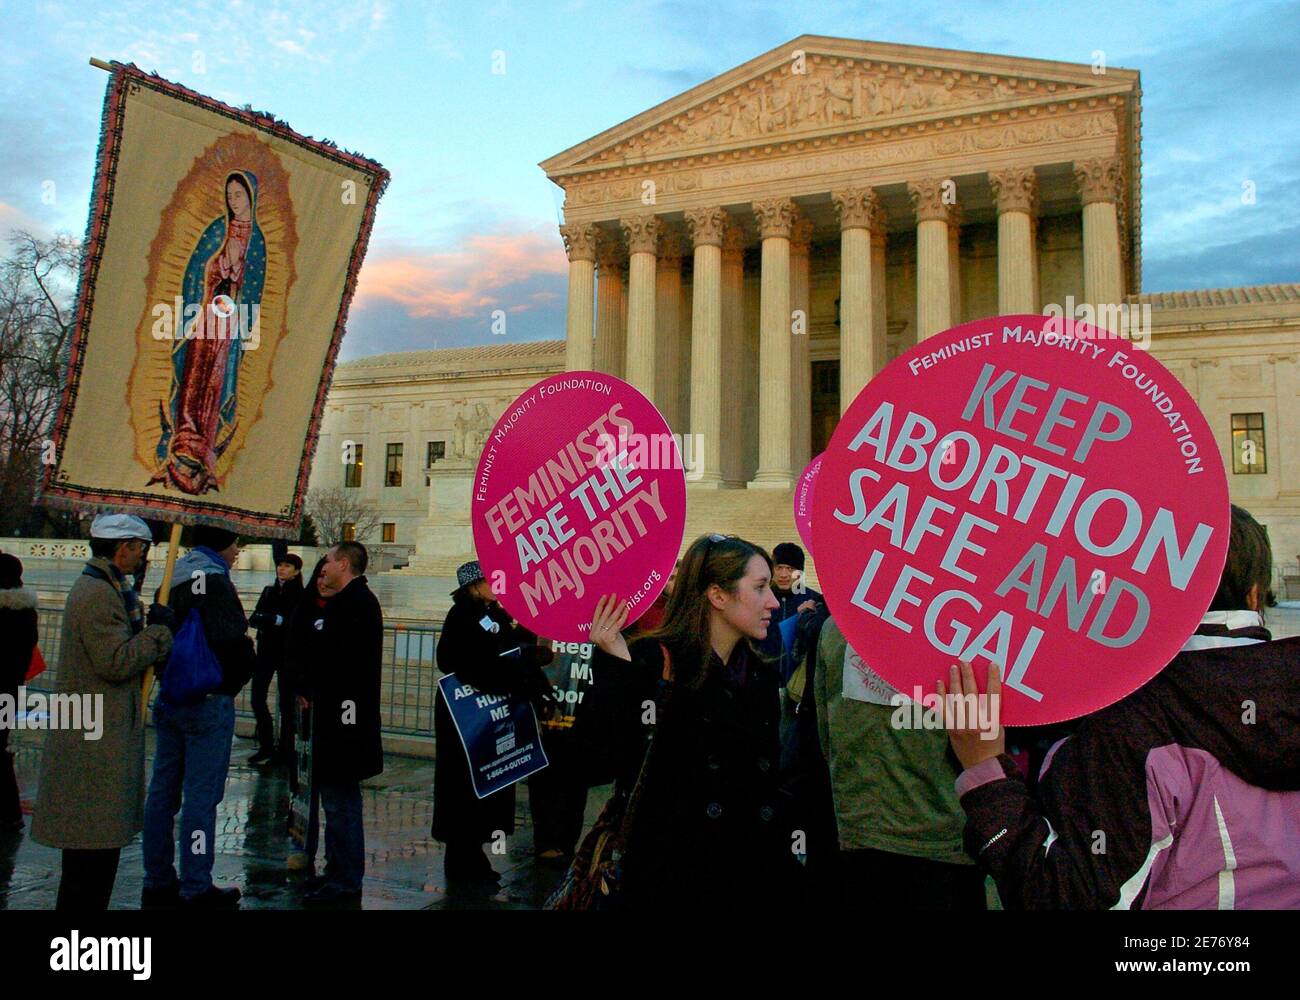 Abortion rights demonstrators (R) share the plaza with pro-life demonstrators (L) in front of the US Supreme Court to mark the 35th anniversary of Roe vs Wade, the landmark legislation which allowed abortion rights, during a rally in Washington January 22, 2008.      REUTERS/Mike Theiler  (UNITED STATES) Stock Photo